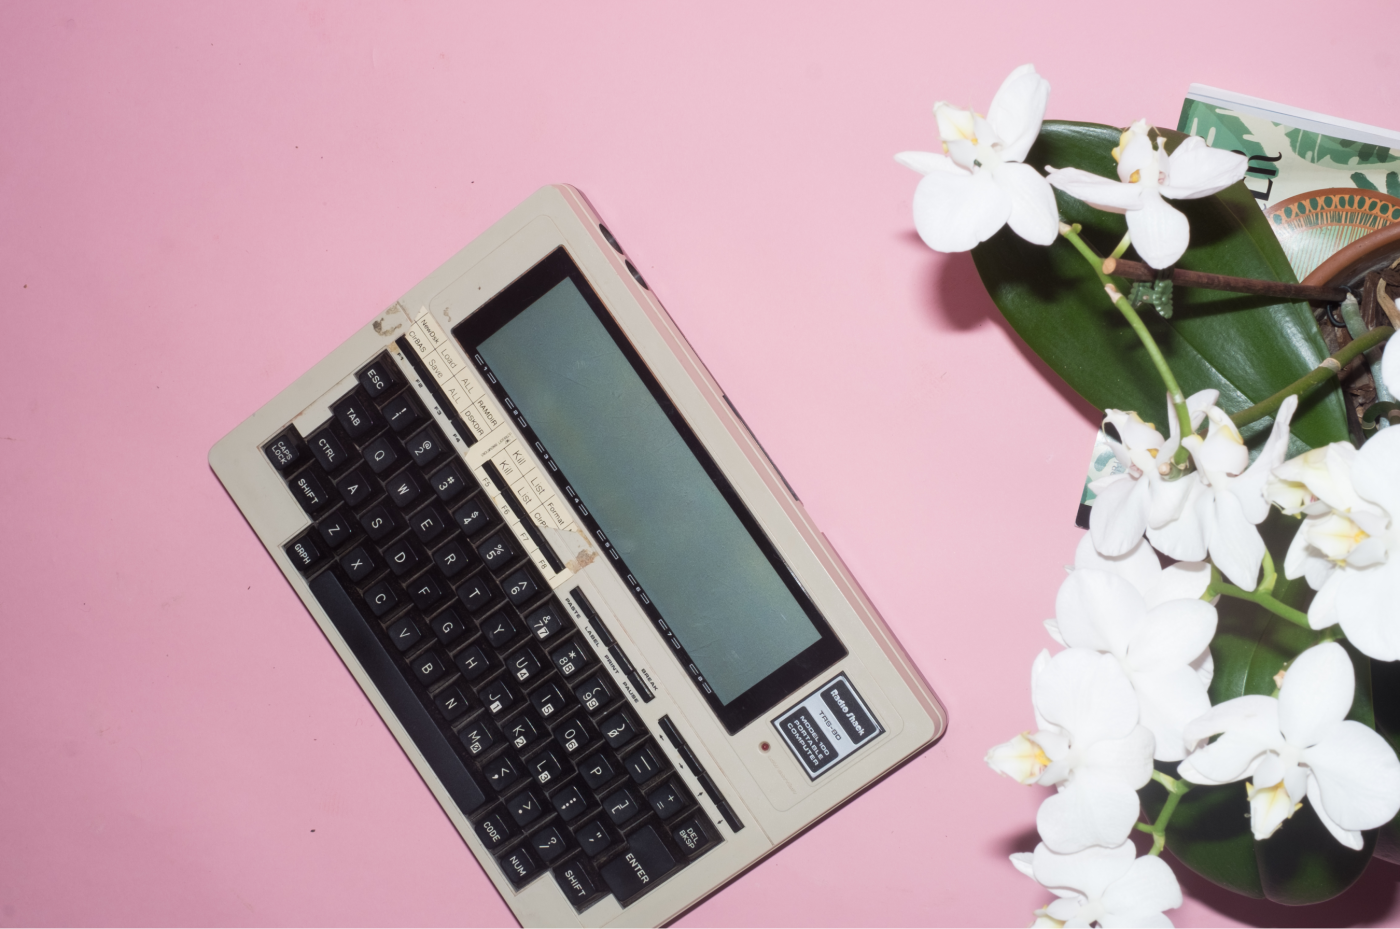 TRS-80 Model 100 and some white flowers on a pink background